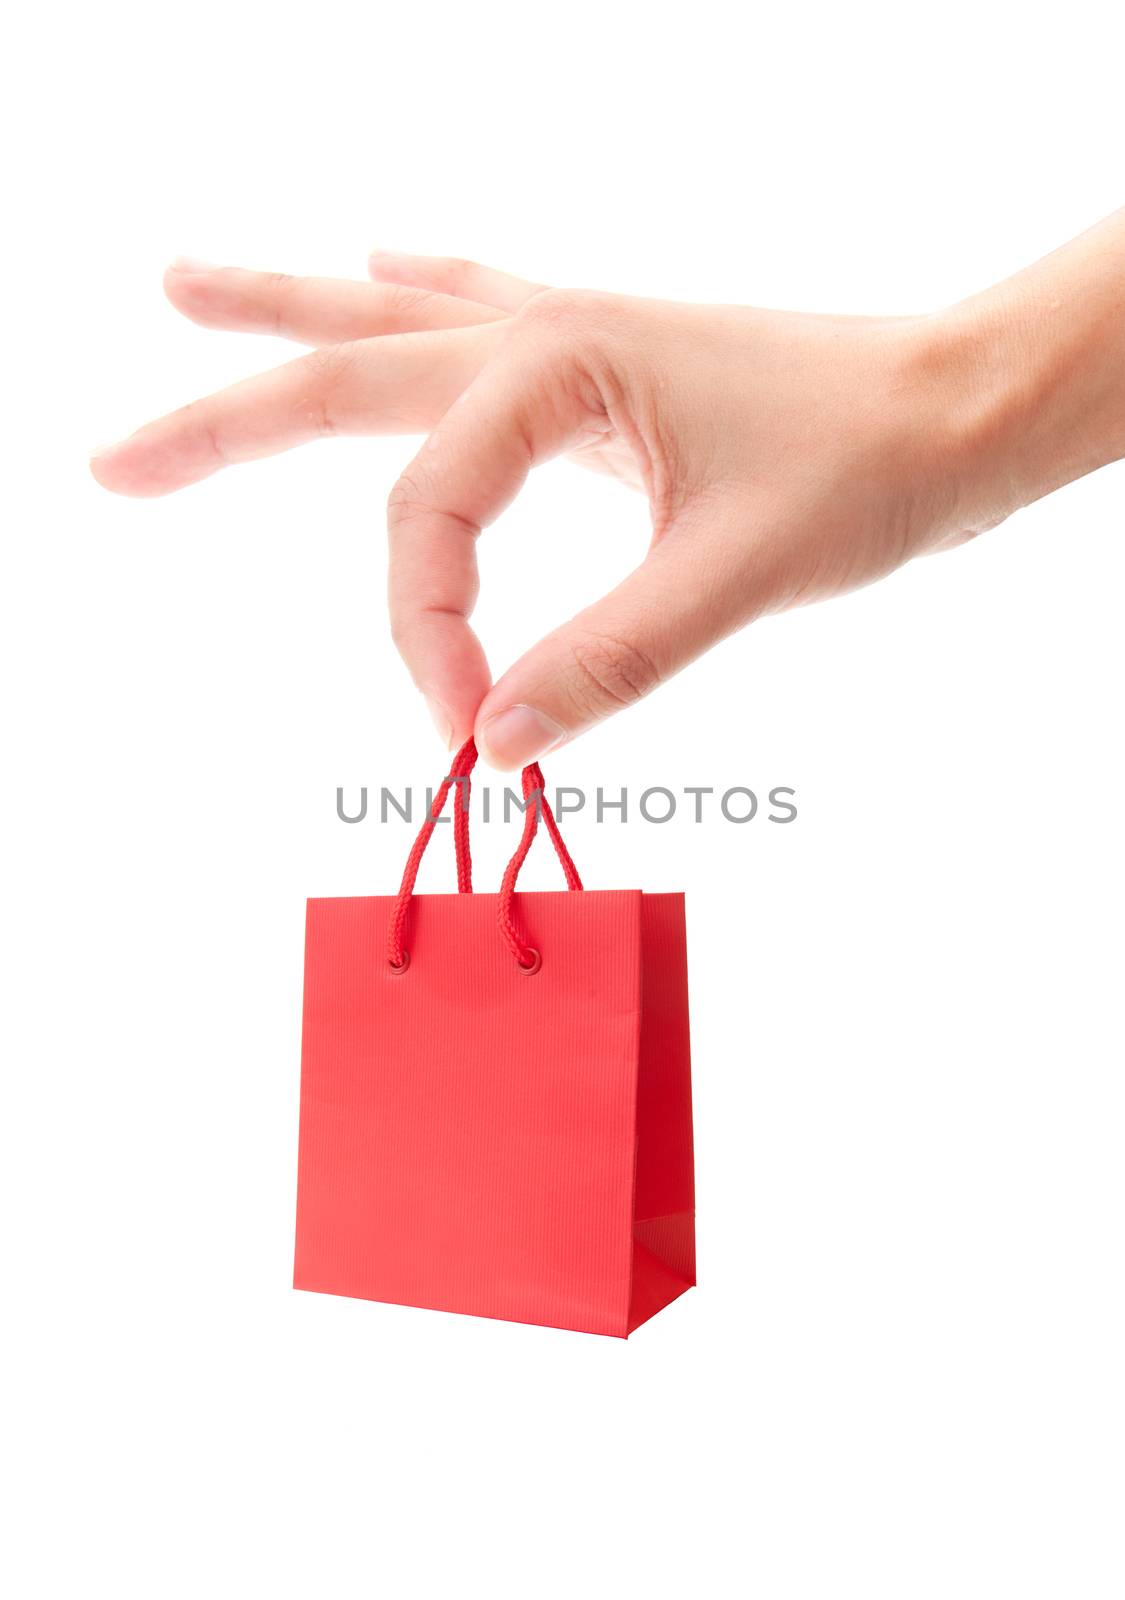 Hand holding a miniature red shopping bag over a white background